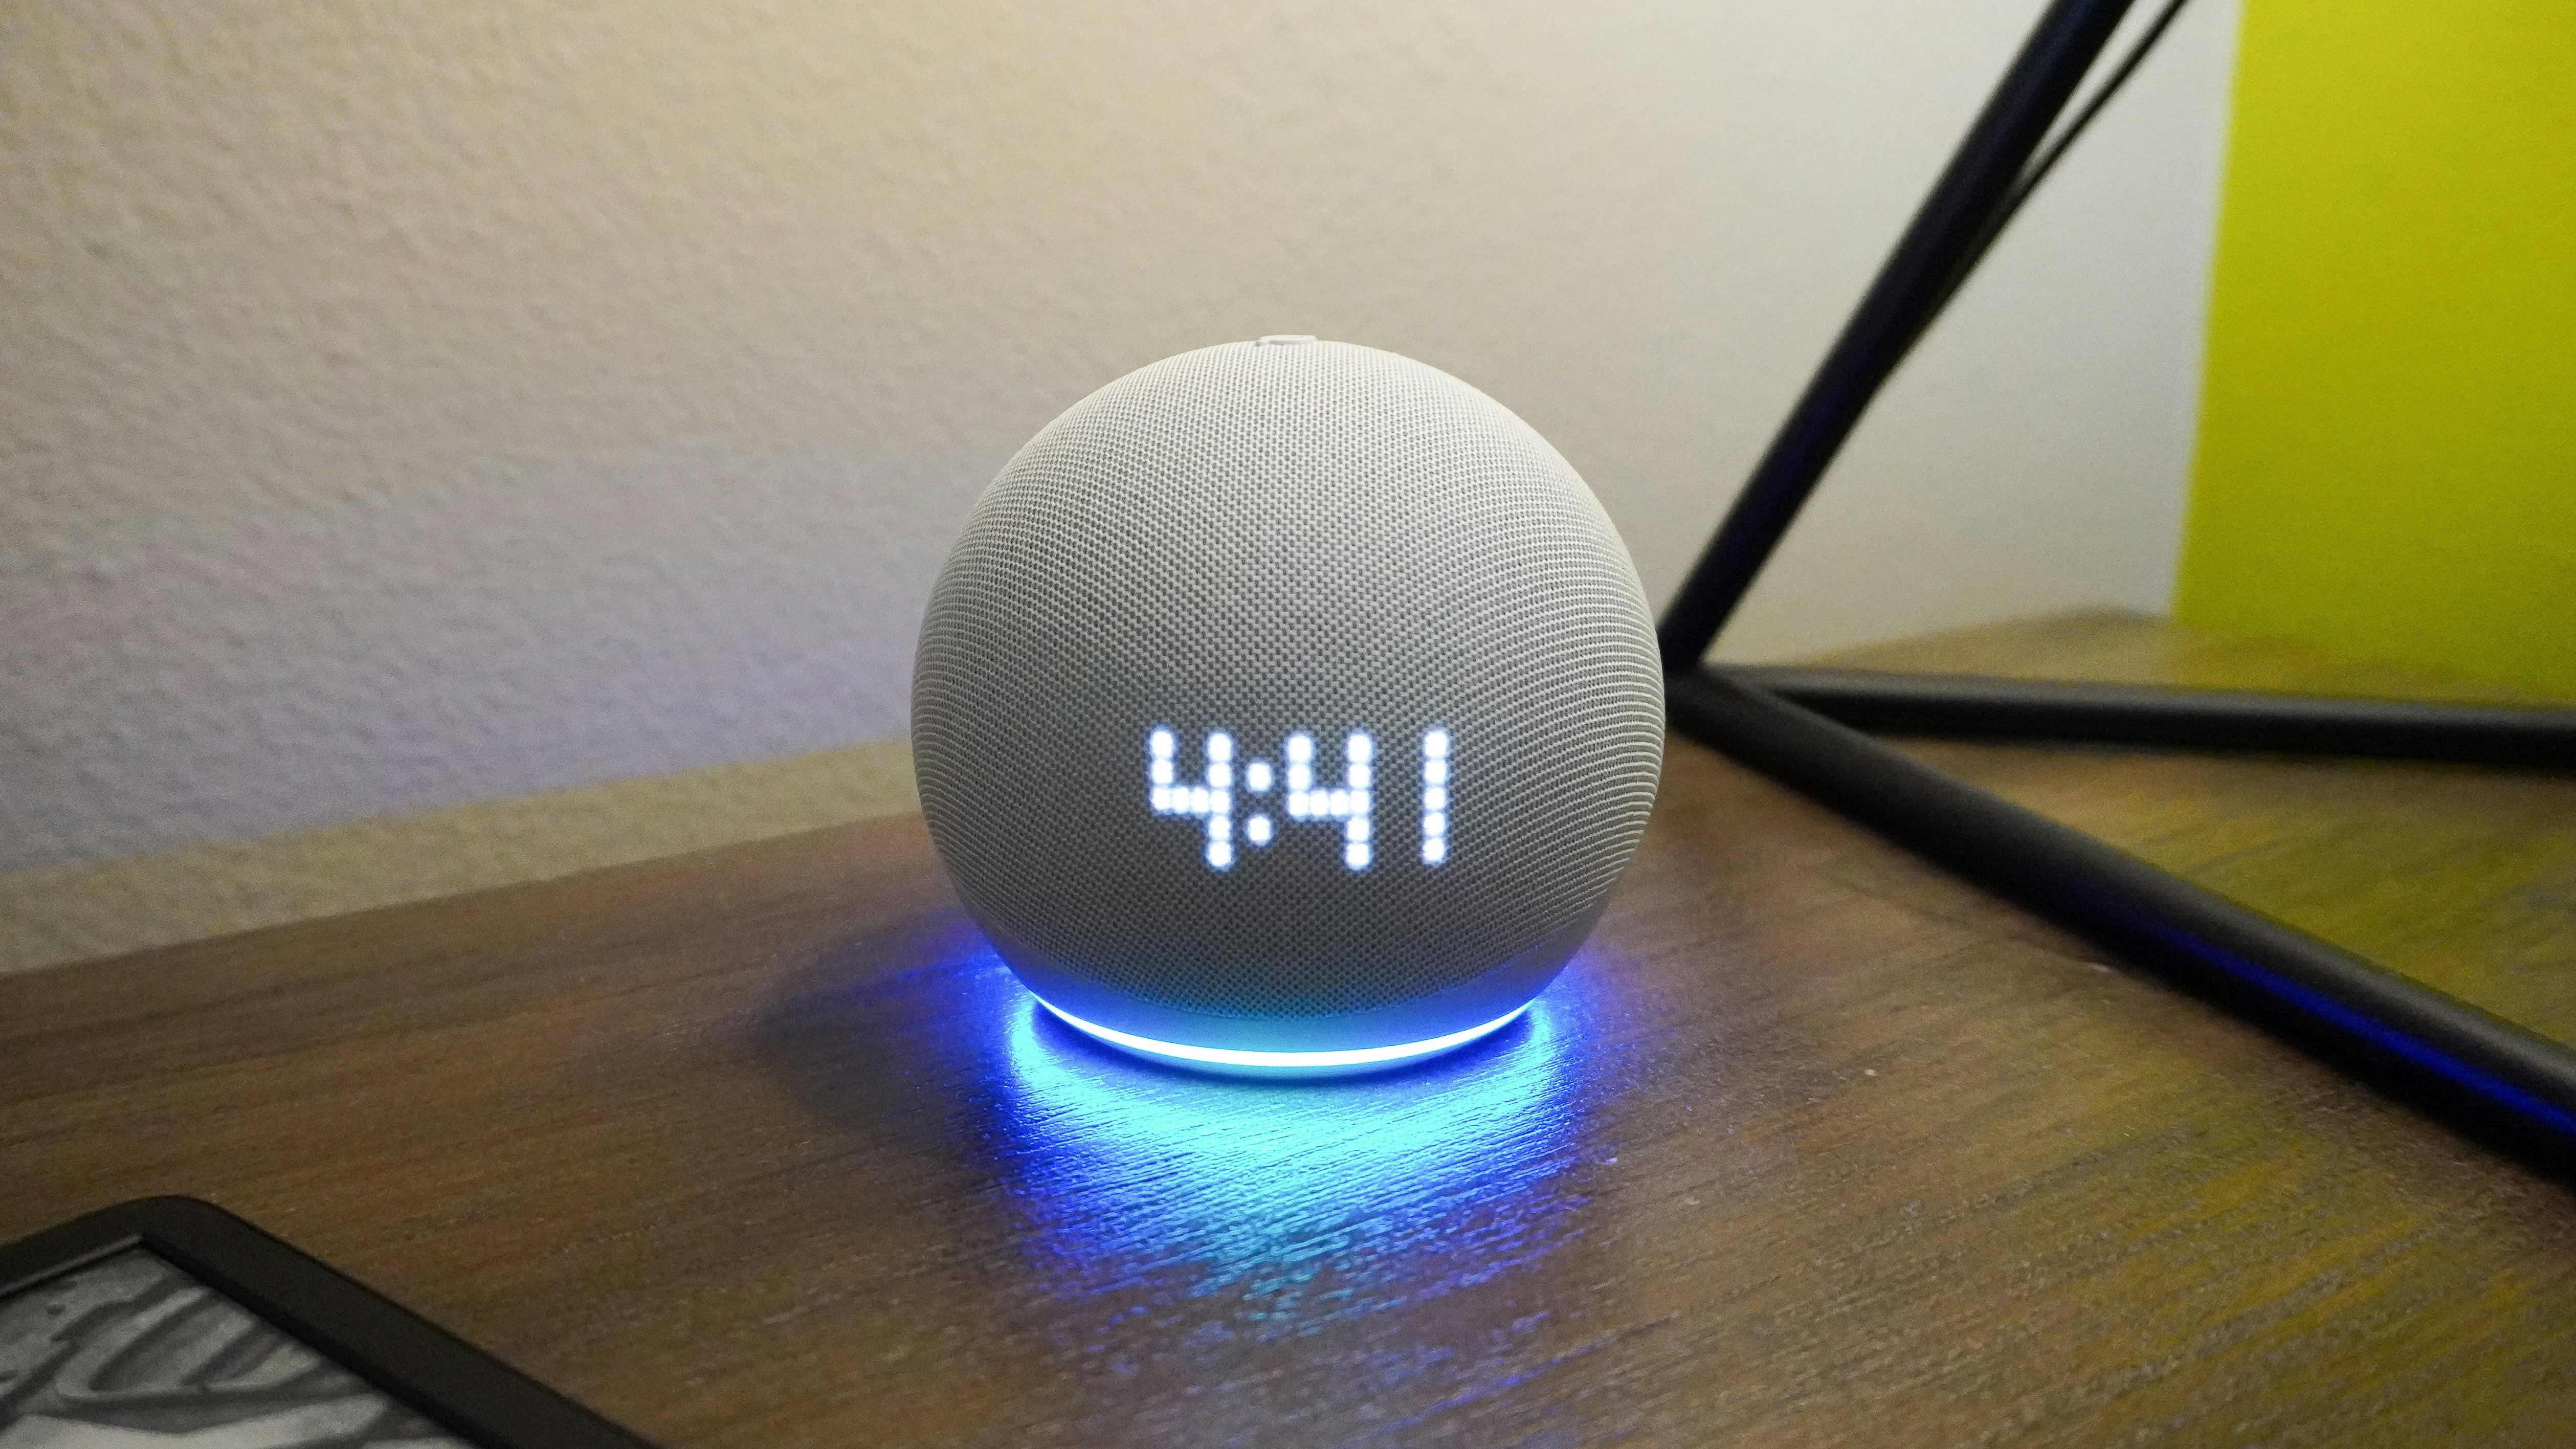 ECHO DOT 4TH GEN WITH CLOCK UNBOXING AND SETUP